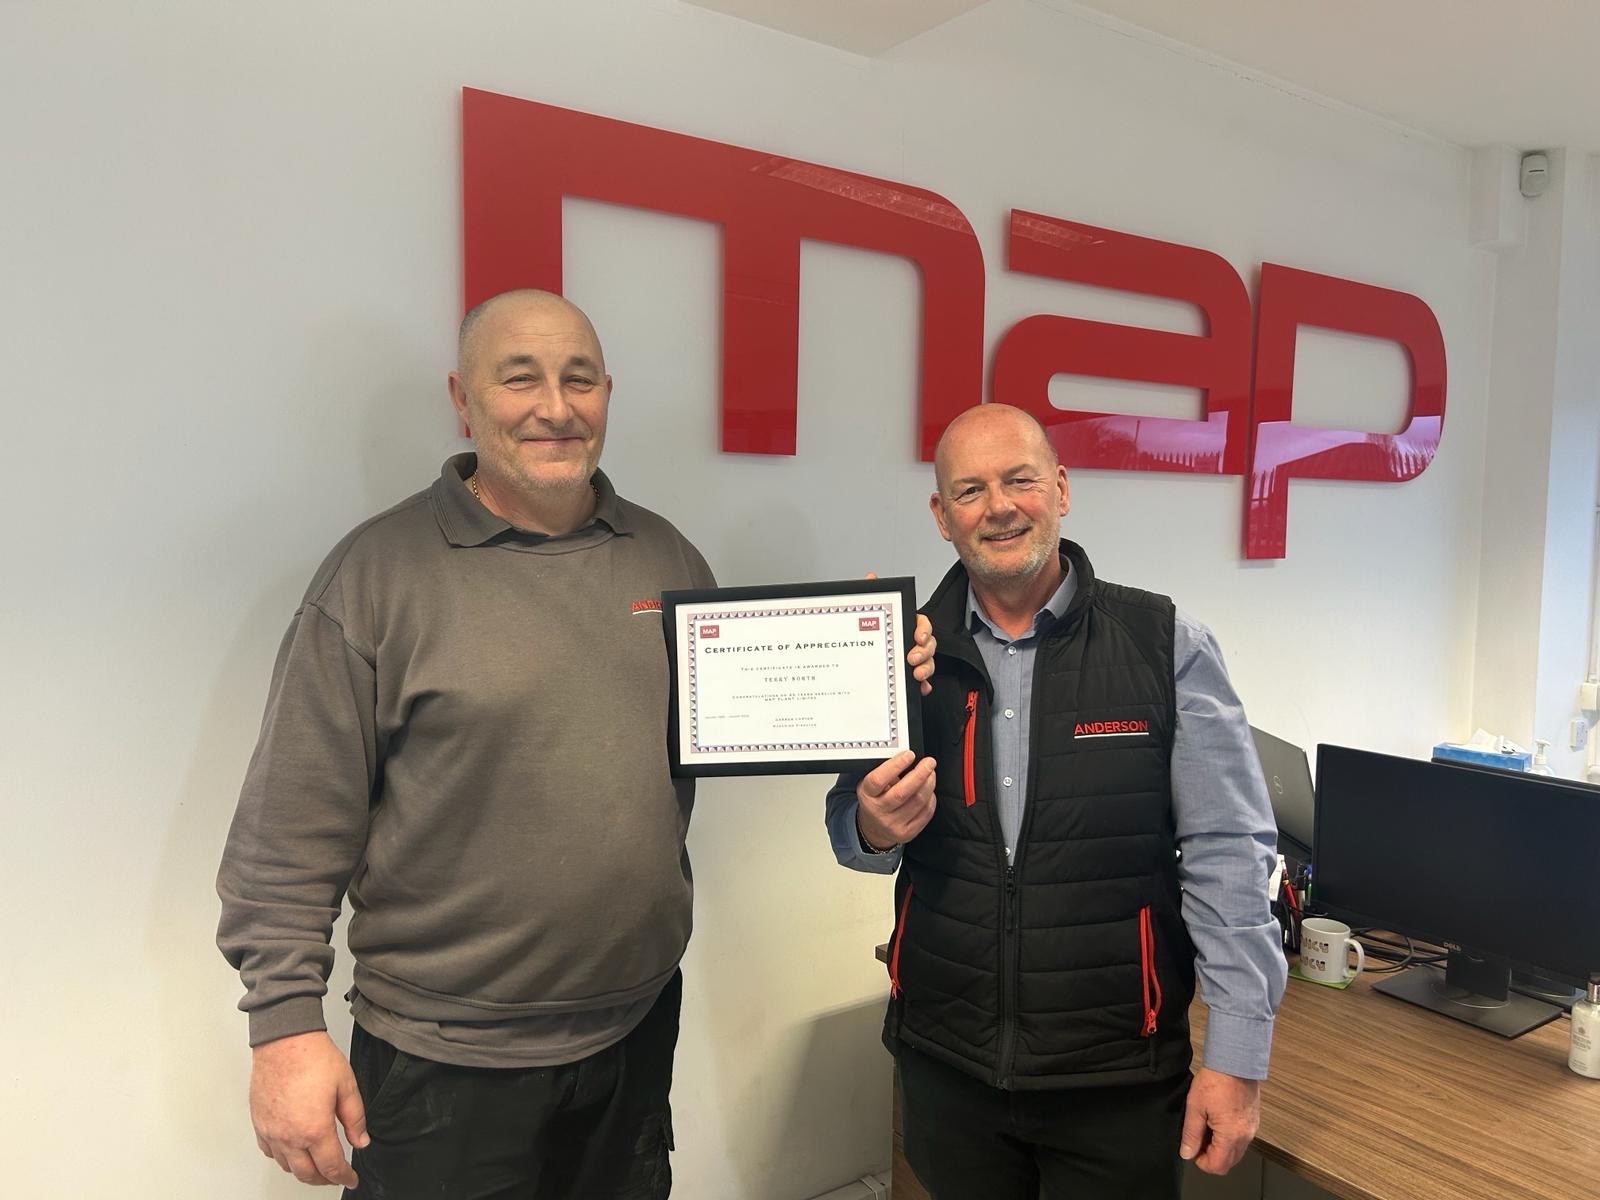 Terry North celebrates 25 years at MAP